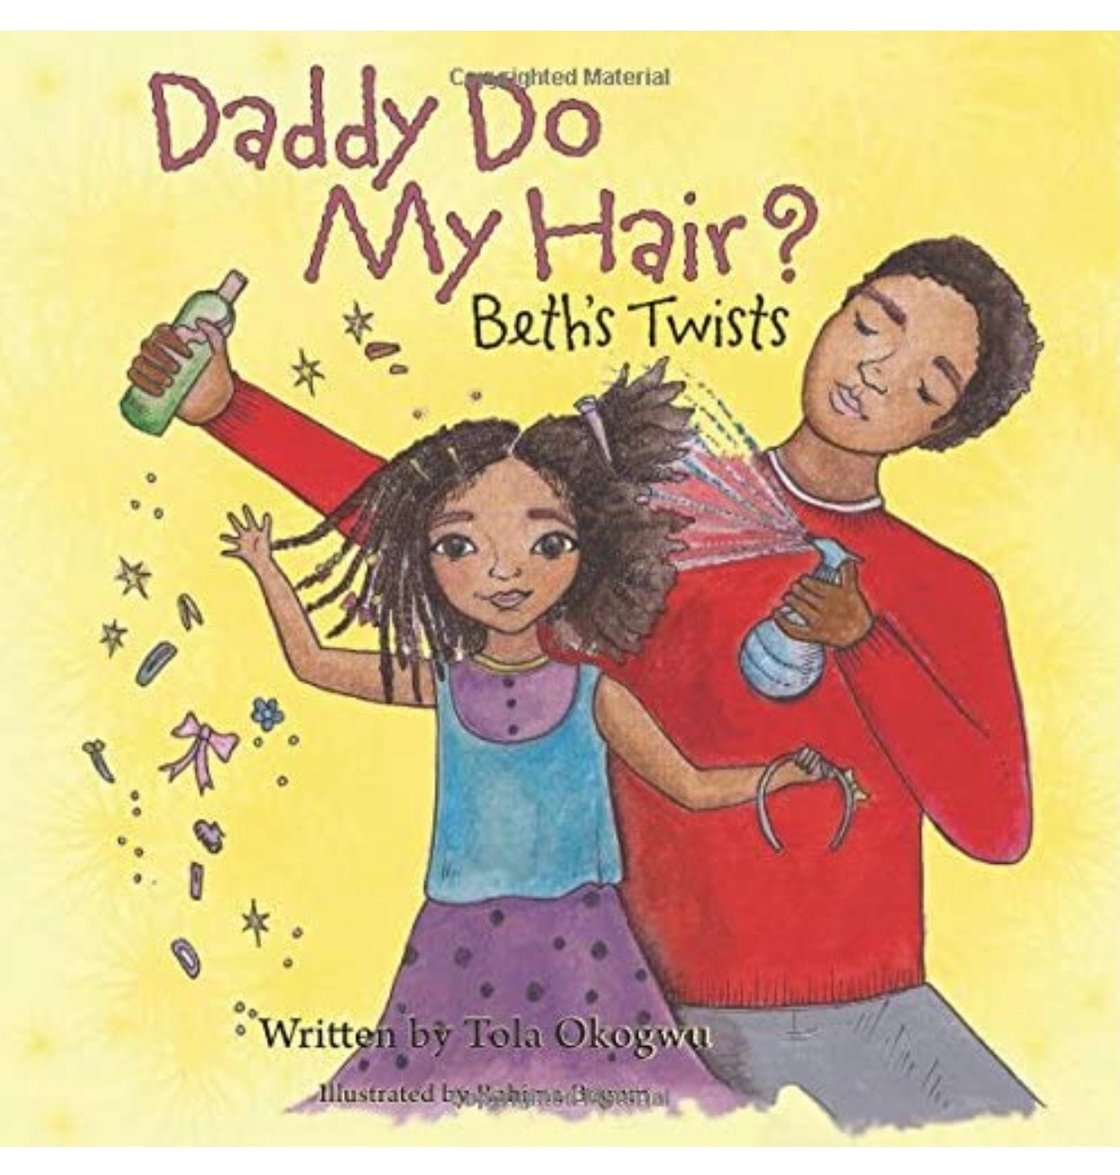 Image of Daddy Do My Hair? Beth’s Twists